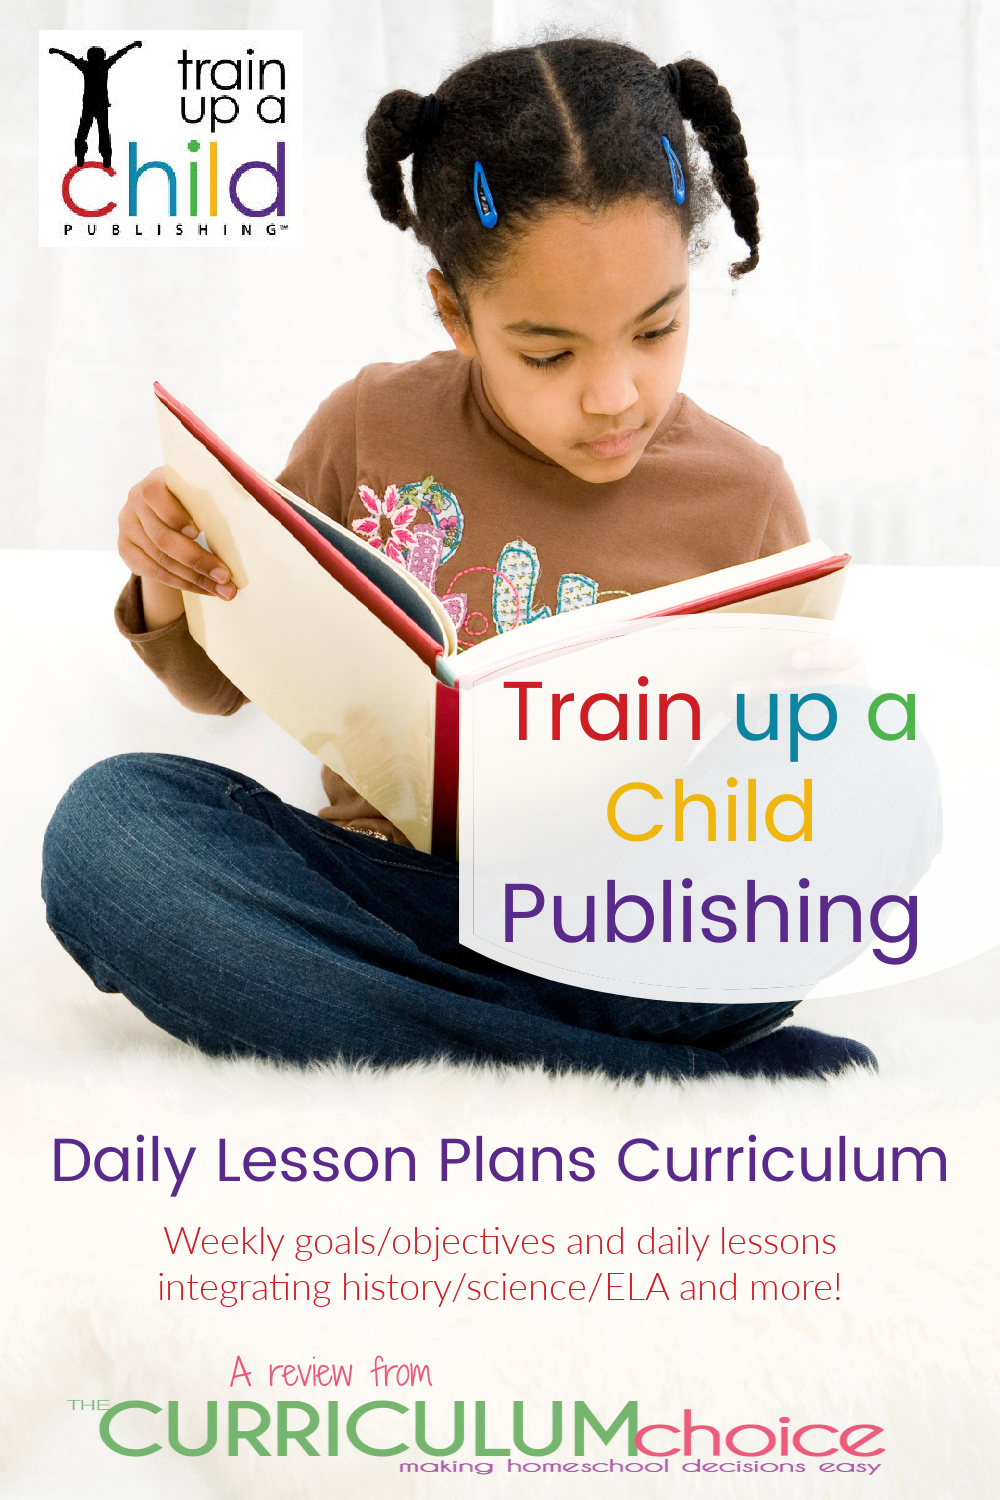 Train up a Child Publishing is a literature based Charlotte Mason approach to homeschooling. The Daily Lesson Plans are already-planned-in-advance and are written for specific grade levels. They include weekly goals and objectives for each subject and include daily lessons  integrating the studies of history, science (K-8), language arts, fine arts, and projects. A review from The Curriculum Choice.